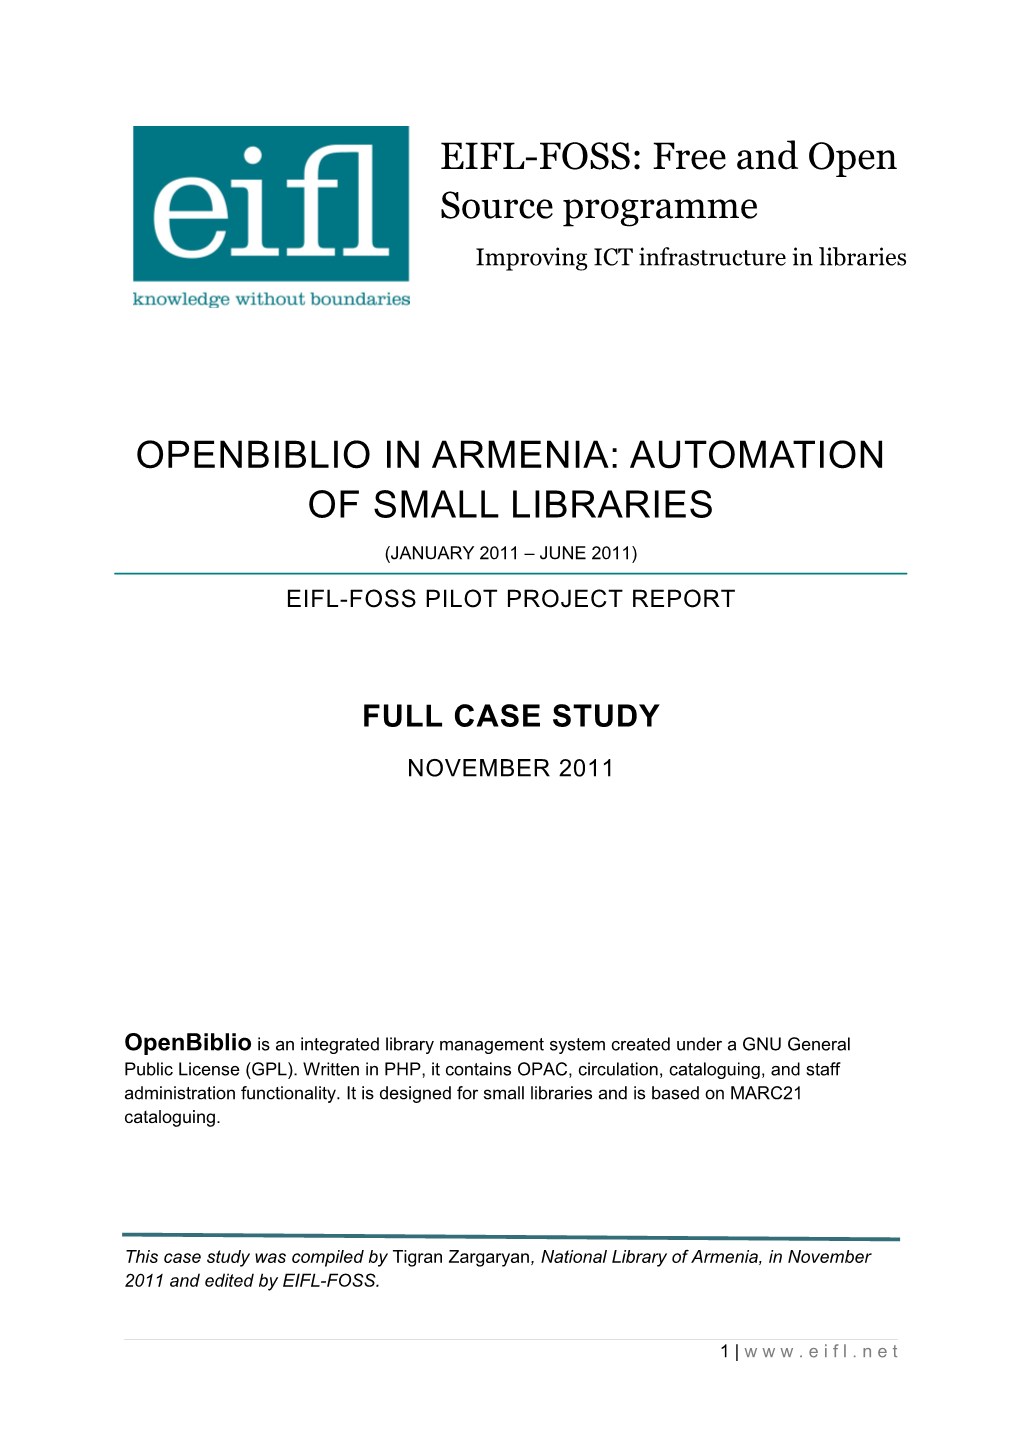 Openbiblio Is an Integrated Library Management System Created Under a GNU General Public